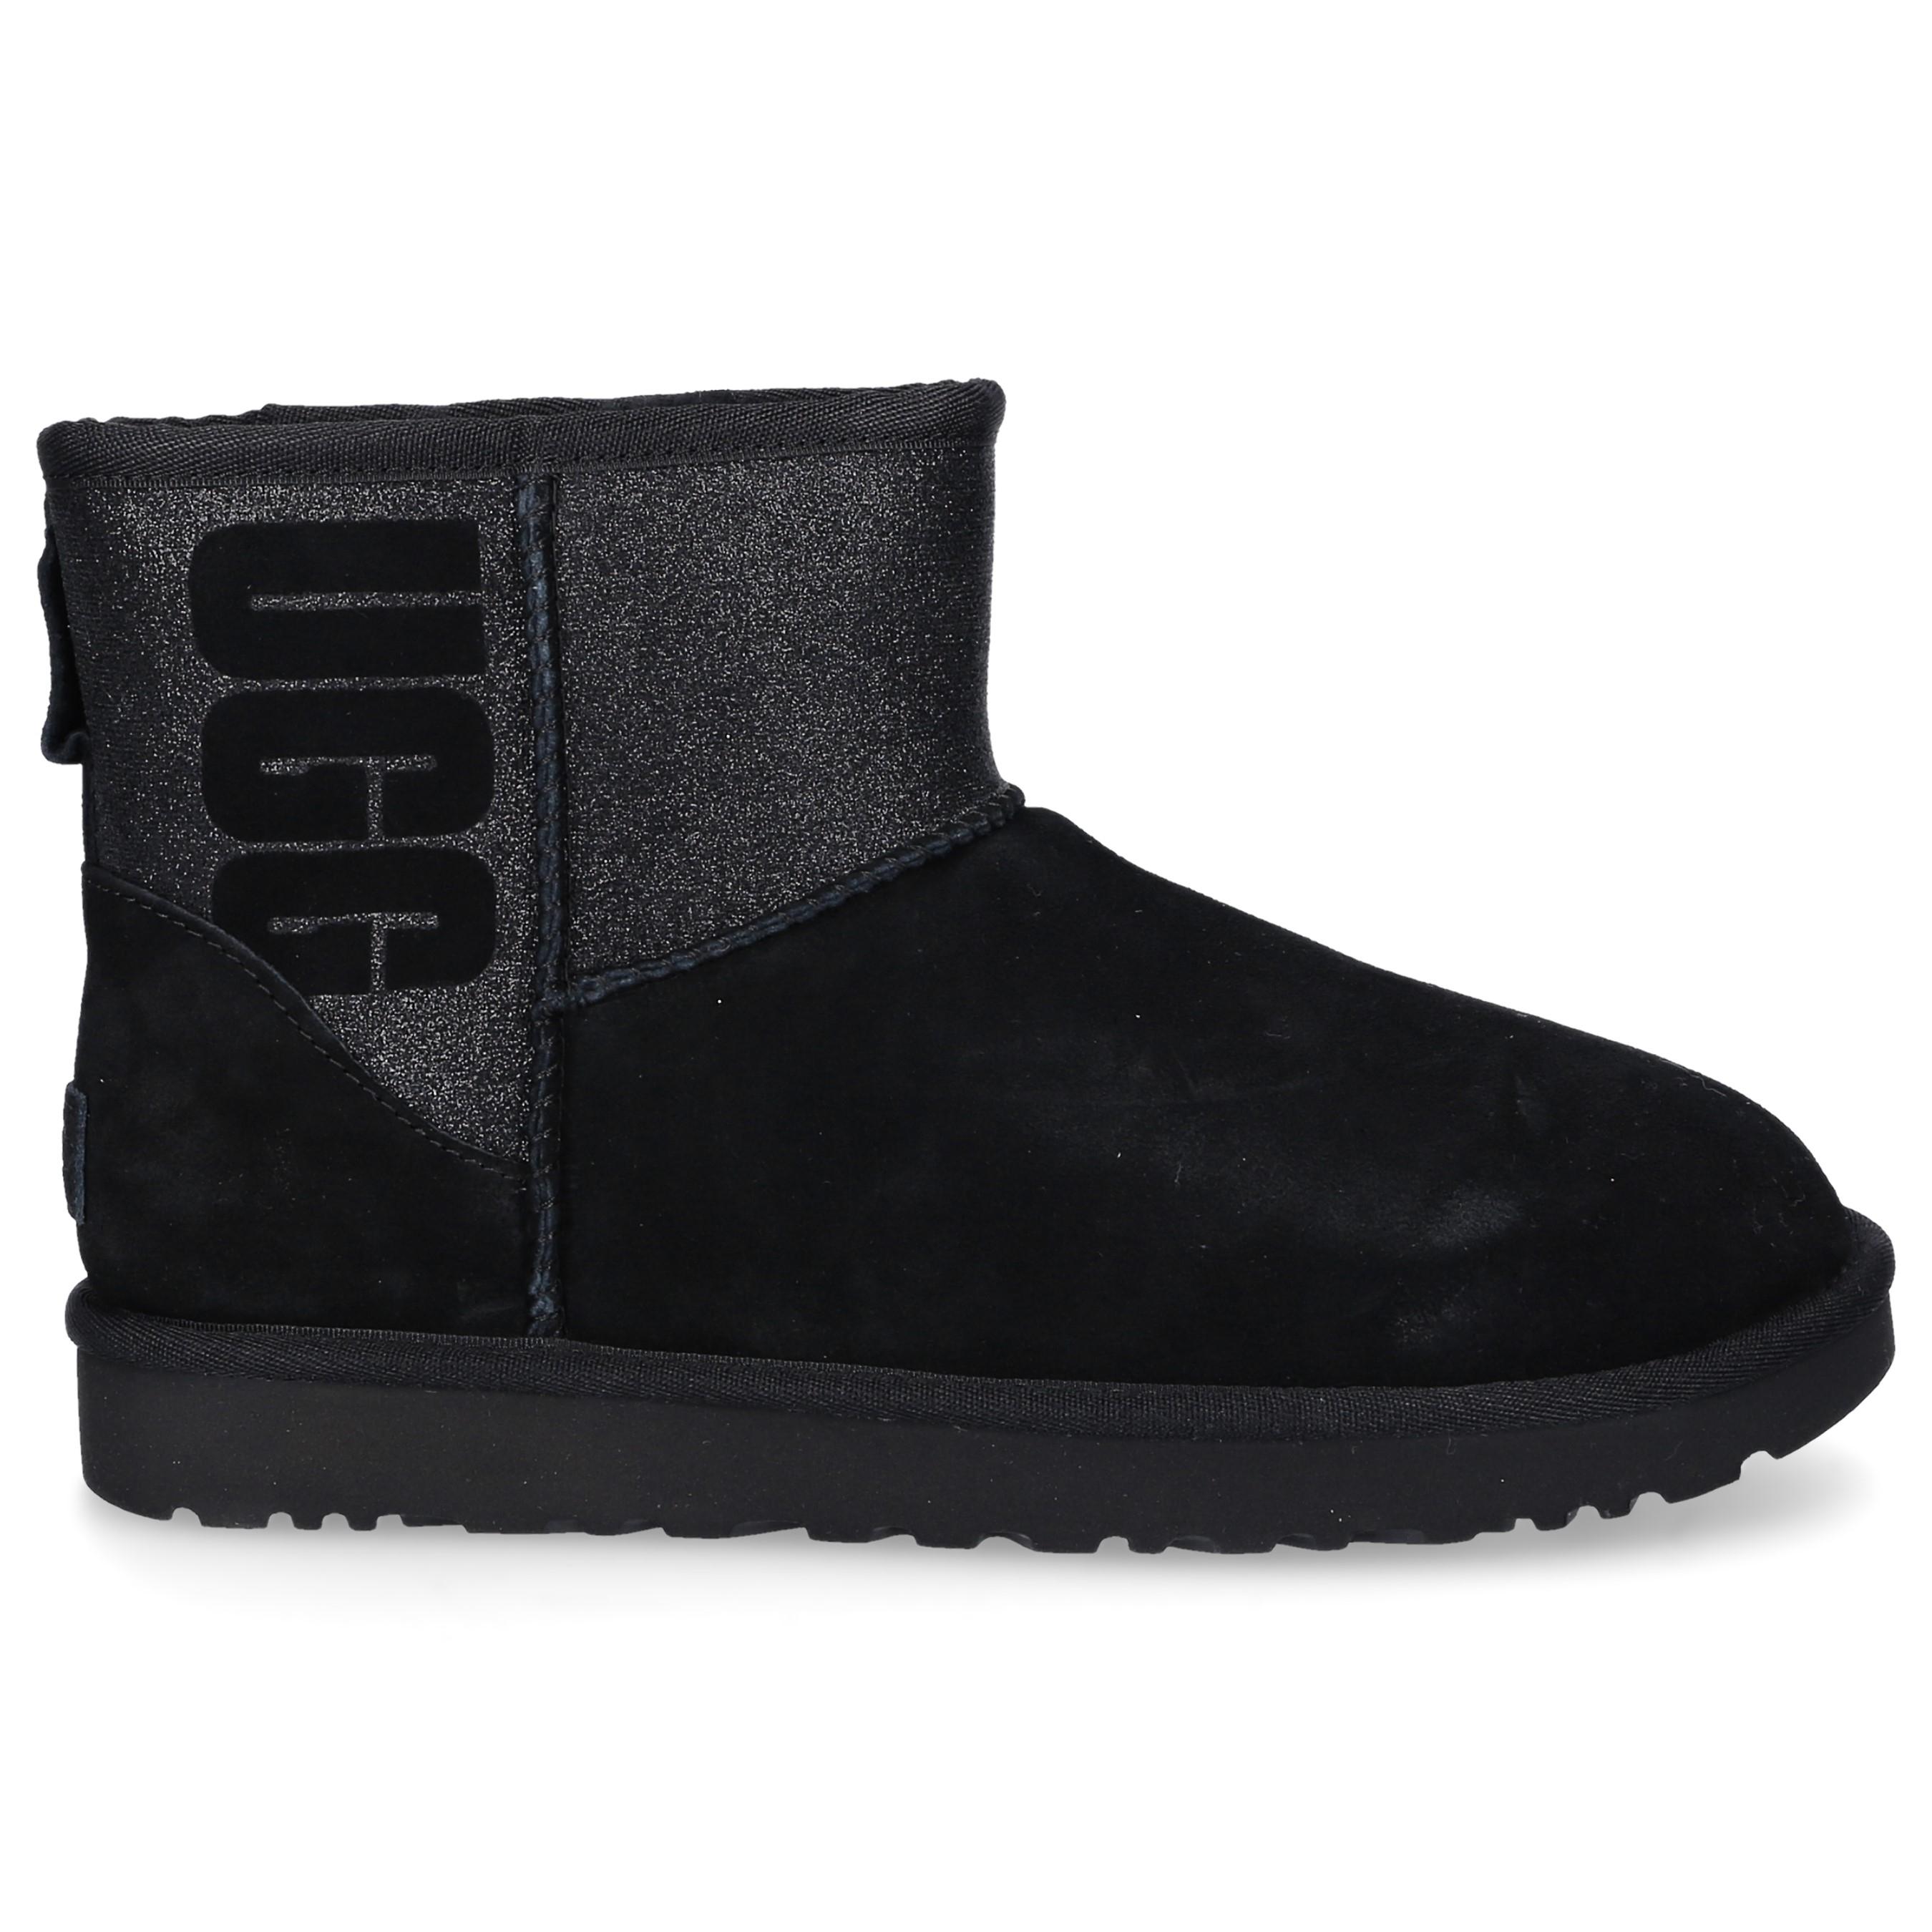 ugg black suede ankle boots